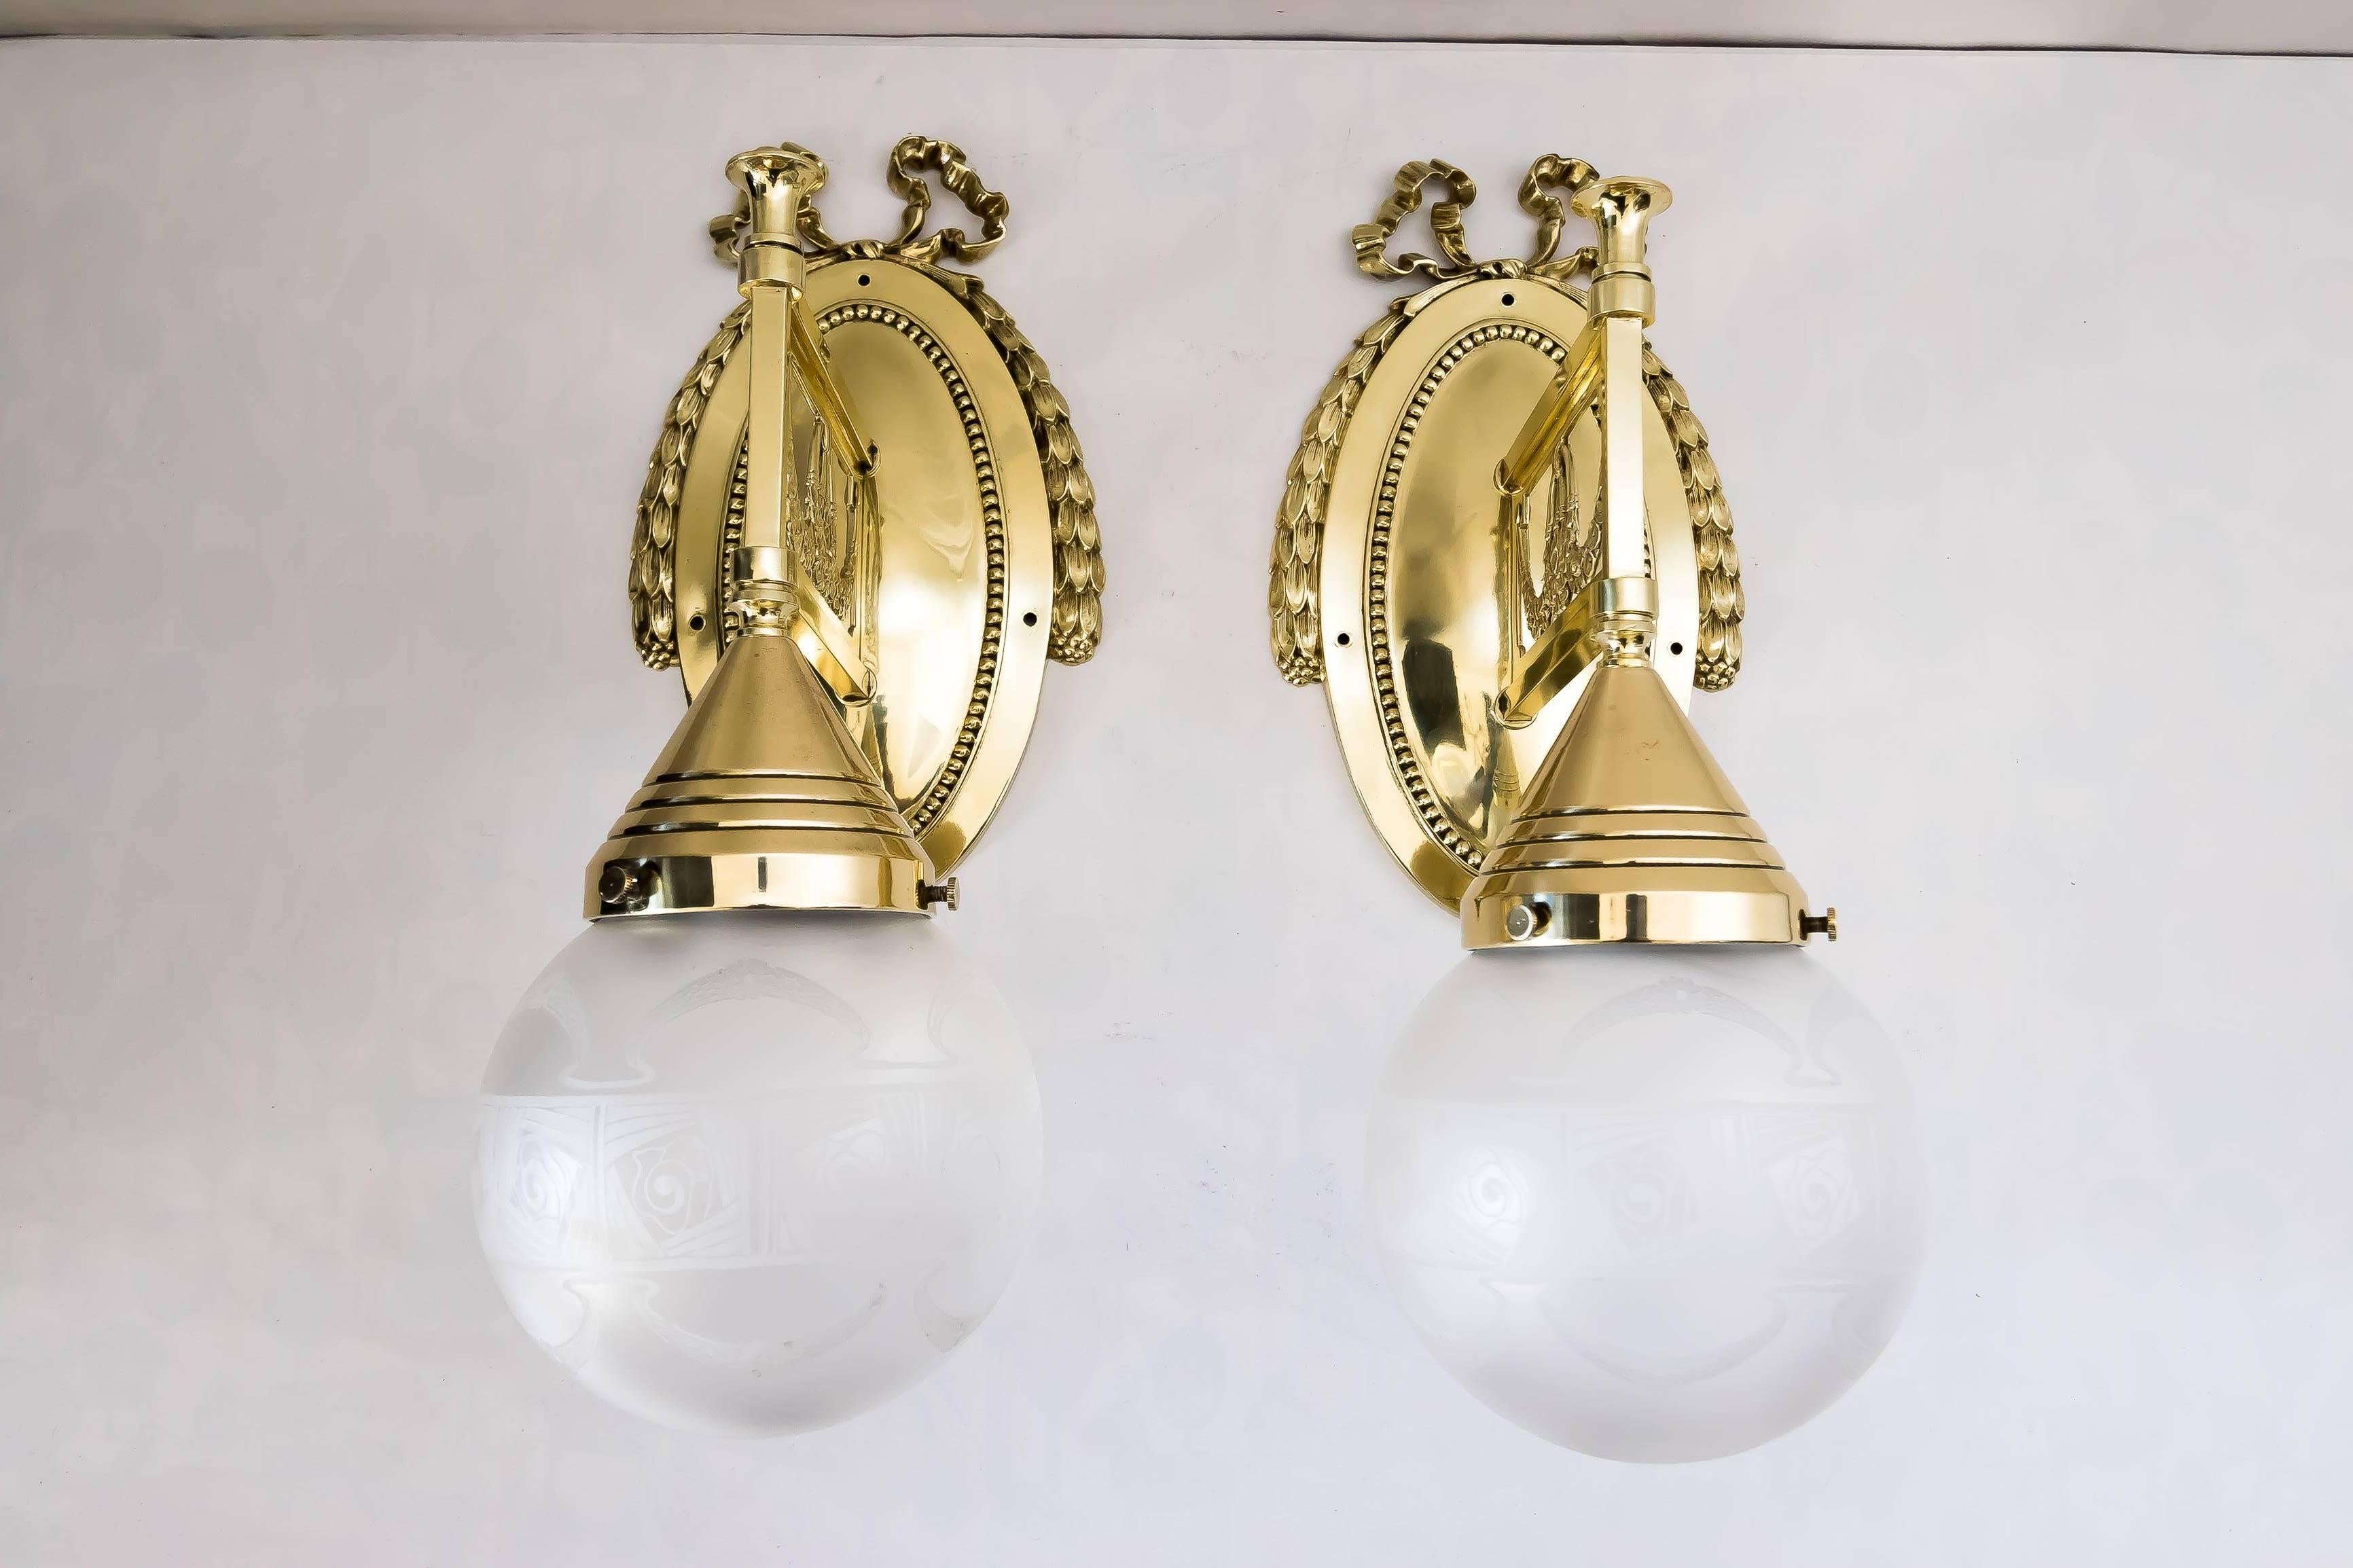 Two beautiful Jugendstil wall lamps with original glass
polished and stove enameled.